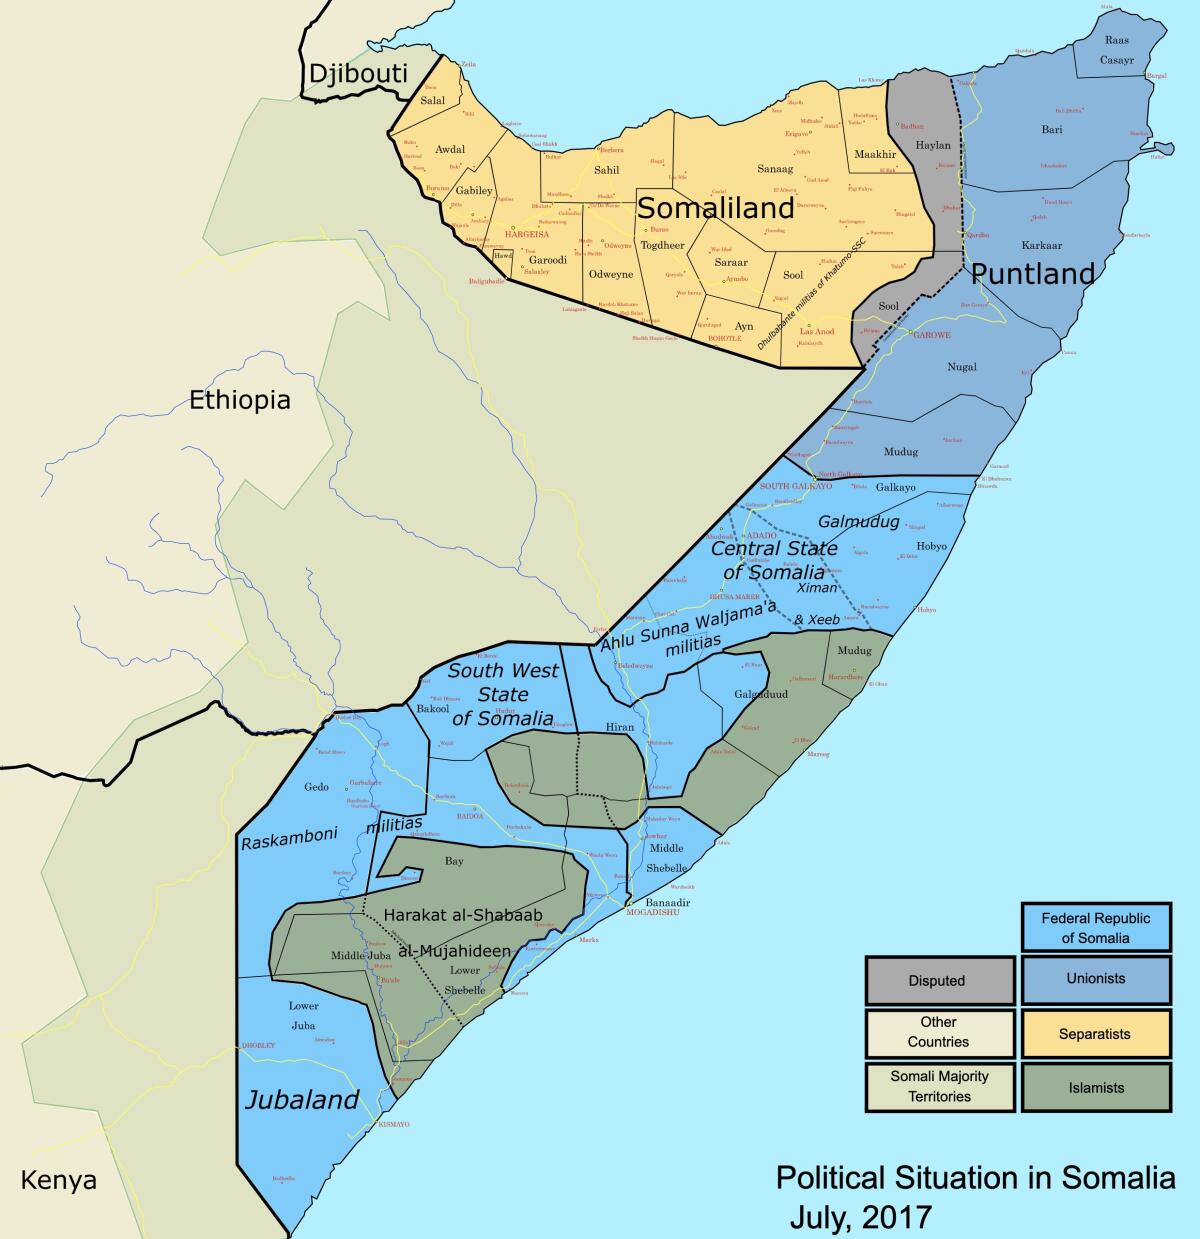 Somalia today is still fragmented into sectarian and clan strongholds.